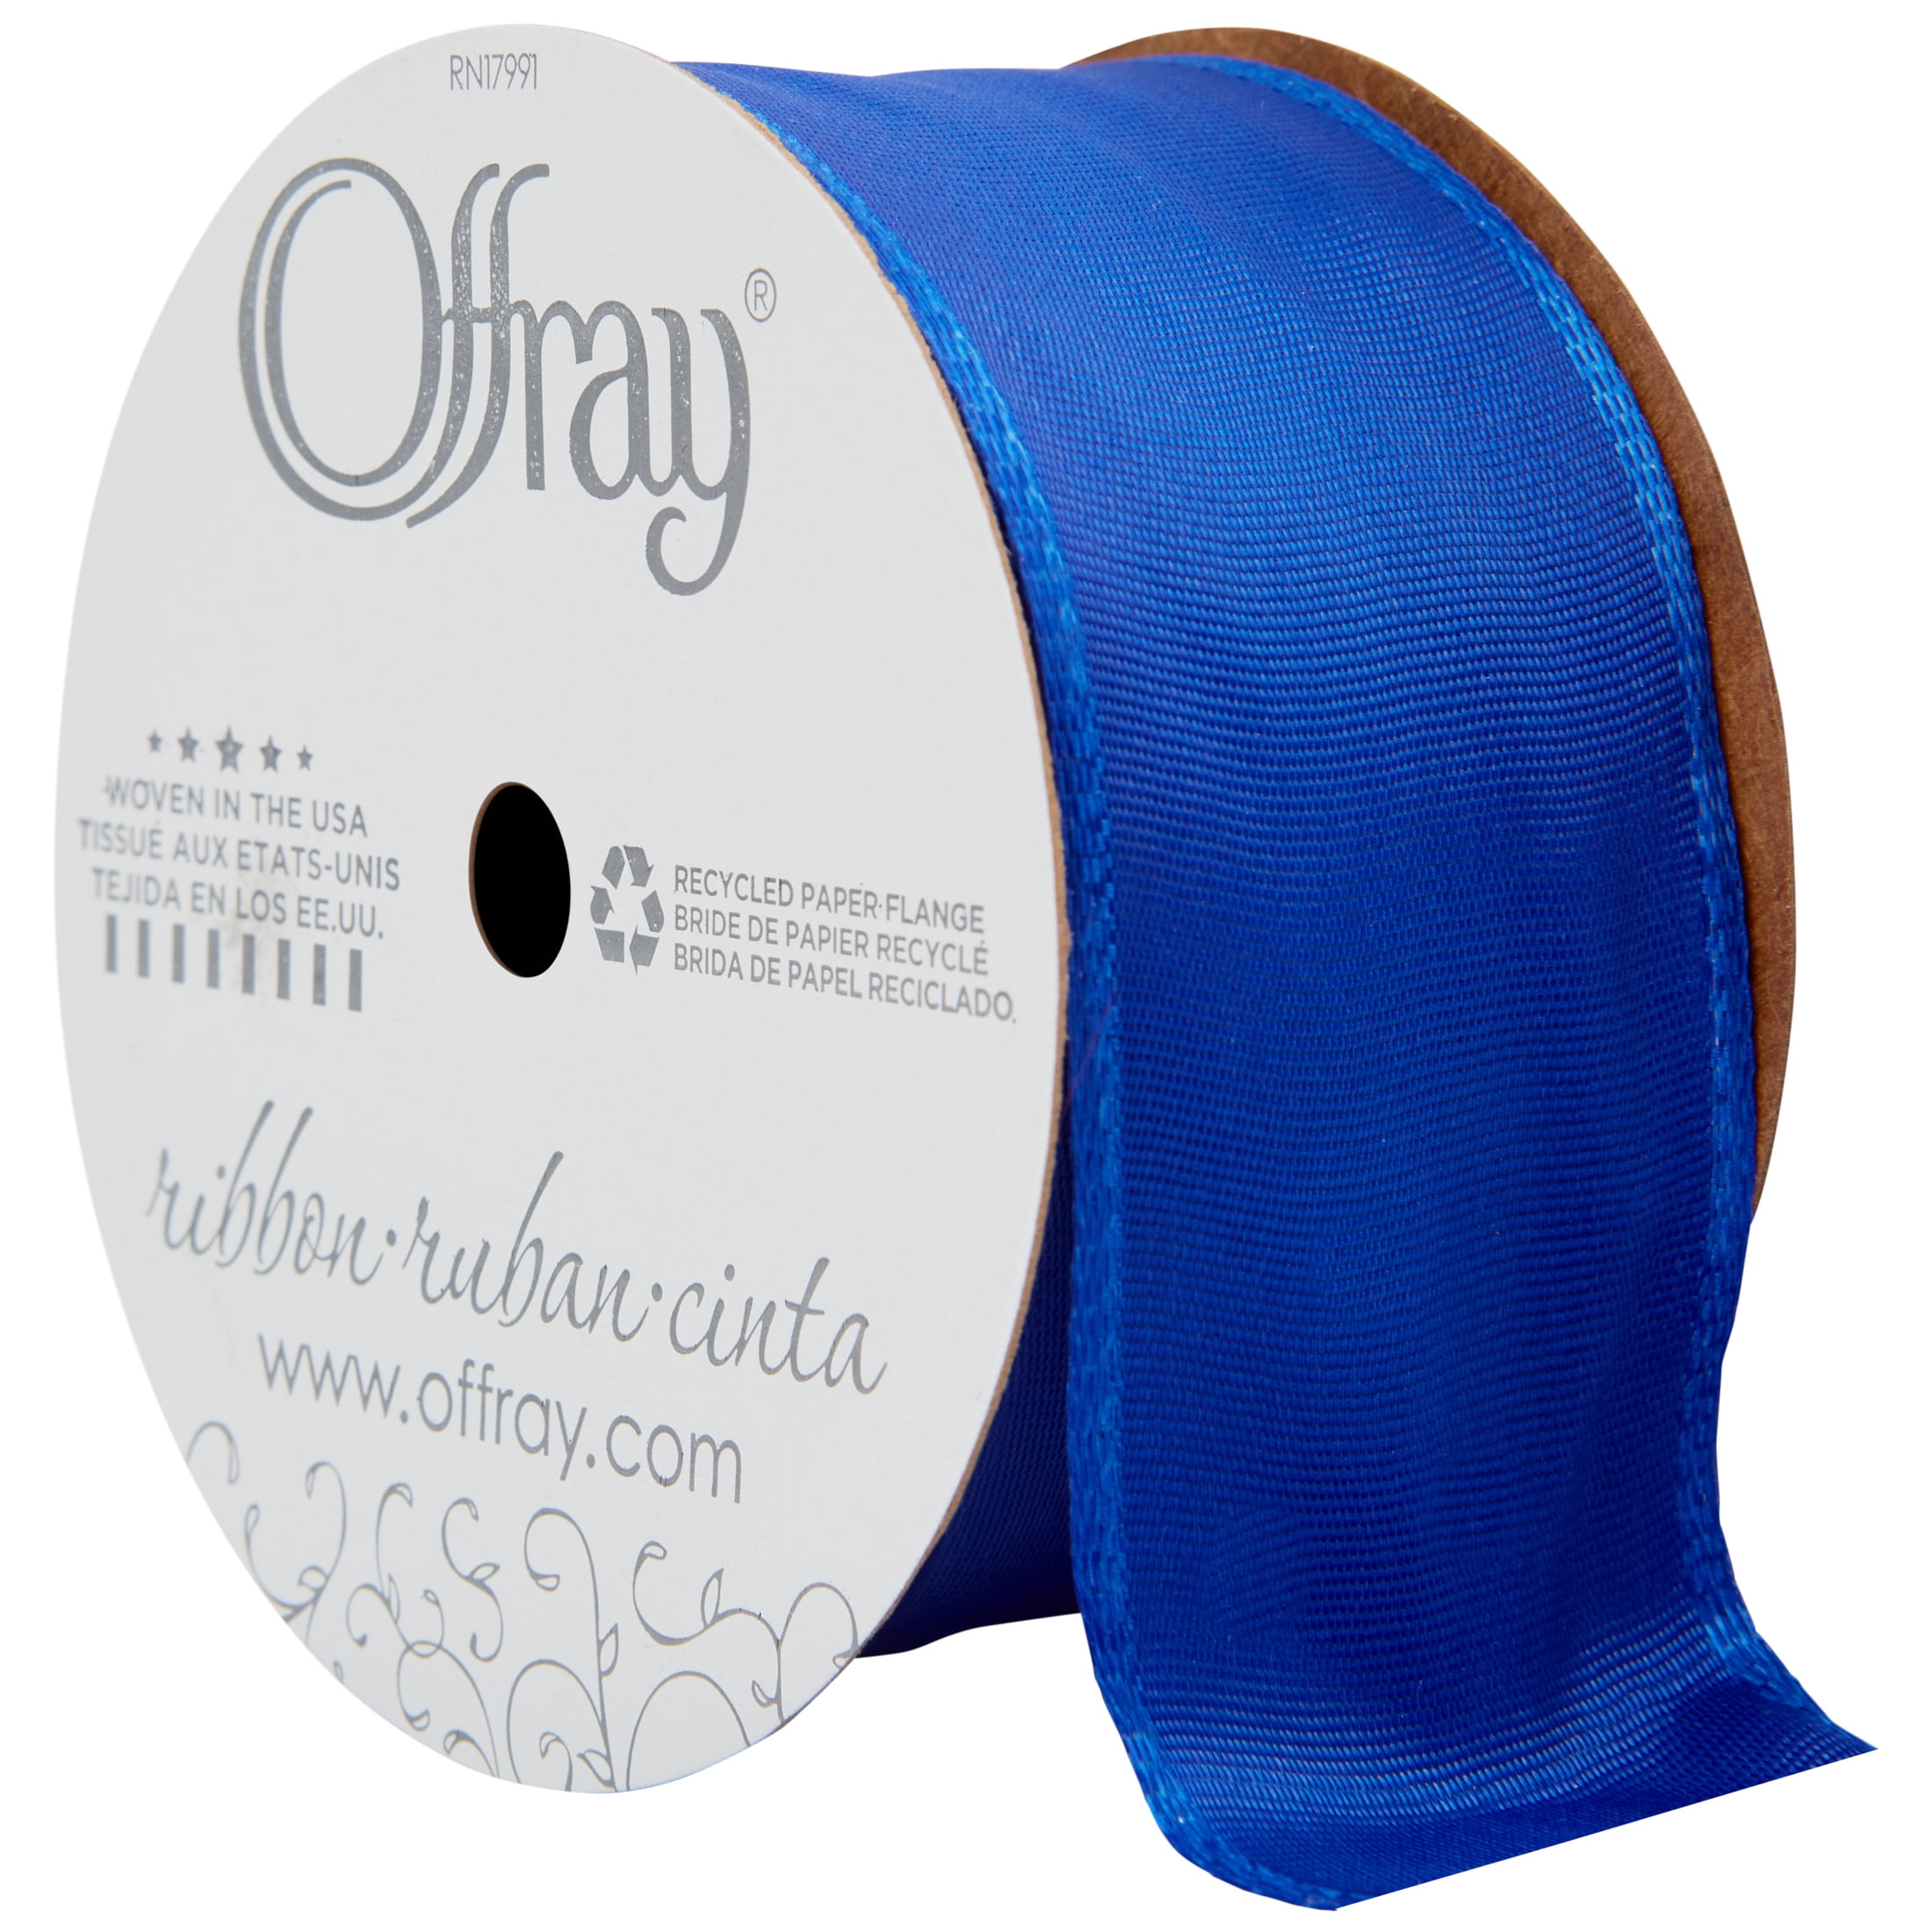 Offray Ribbon, Royal Blue 1 1/2 inch Wired Edge Woven Ribbon for Crafts, Gifting, and Wedding, 9 feet